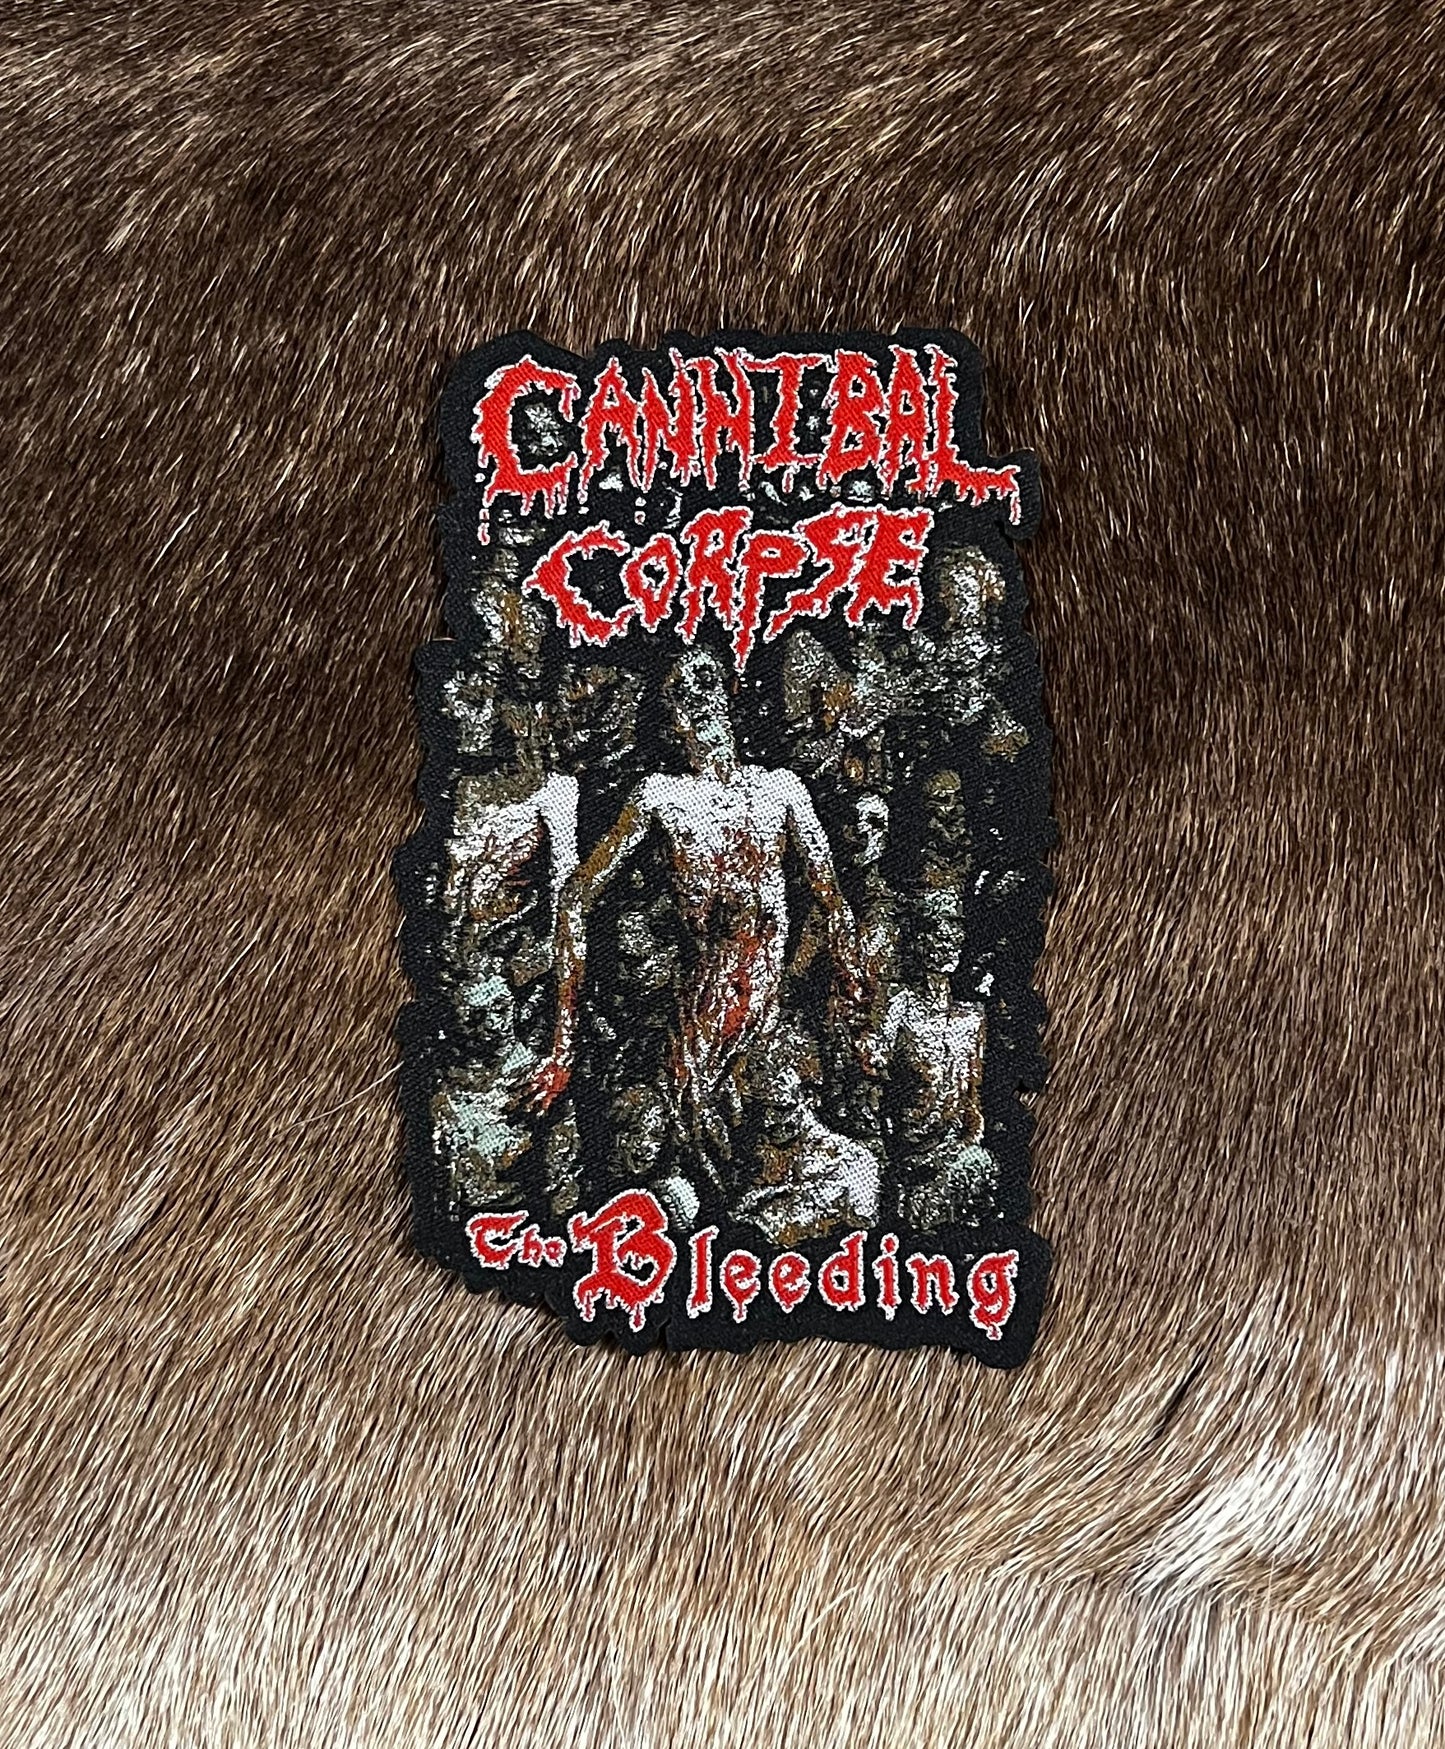 Cannibal Corpse - The Bleeding Cut Out Patch